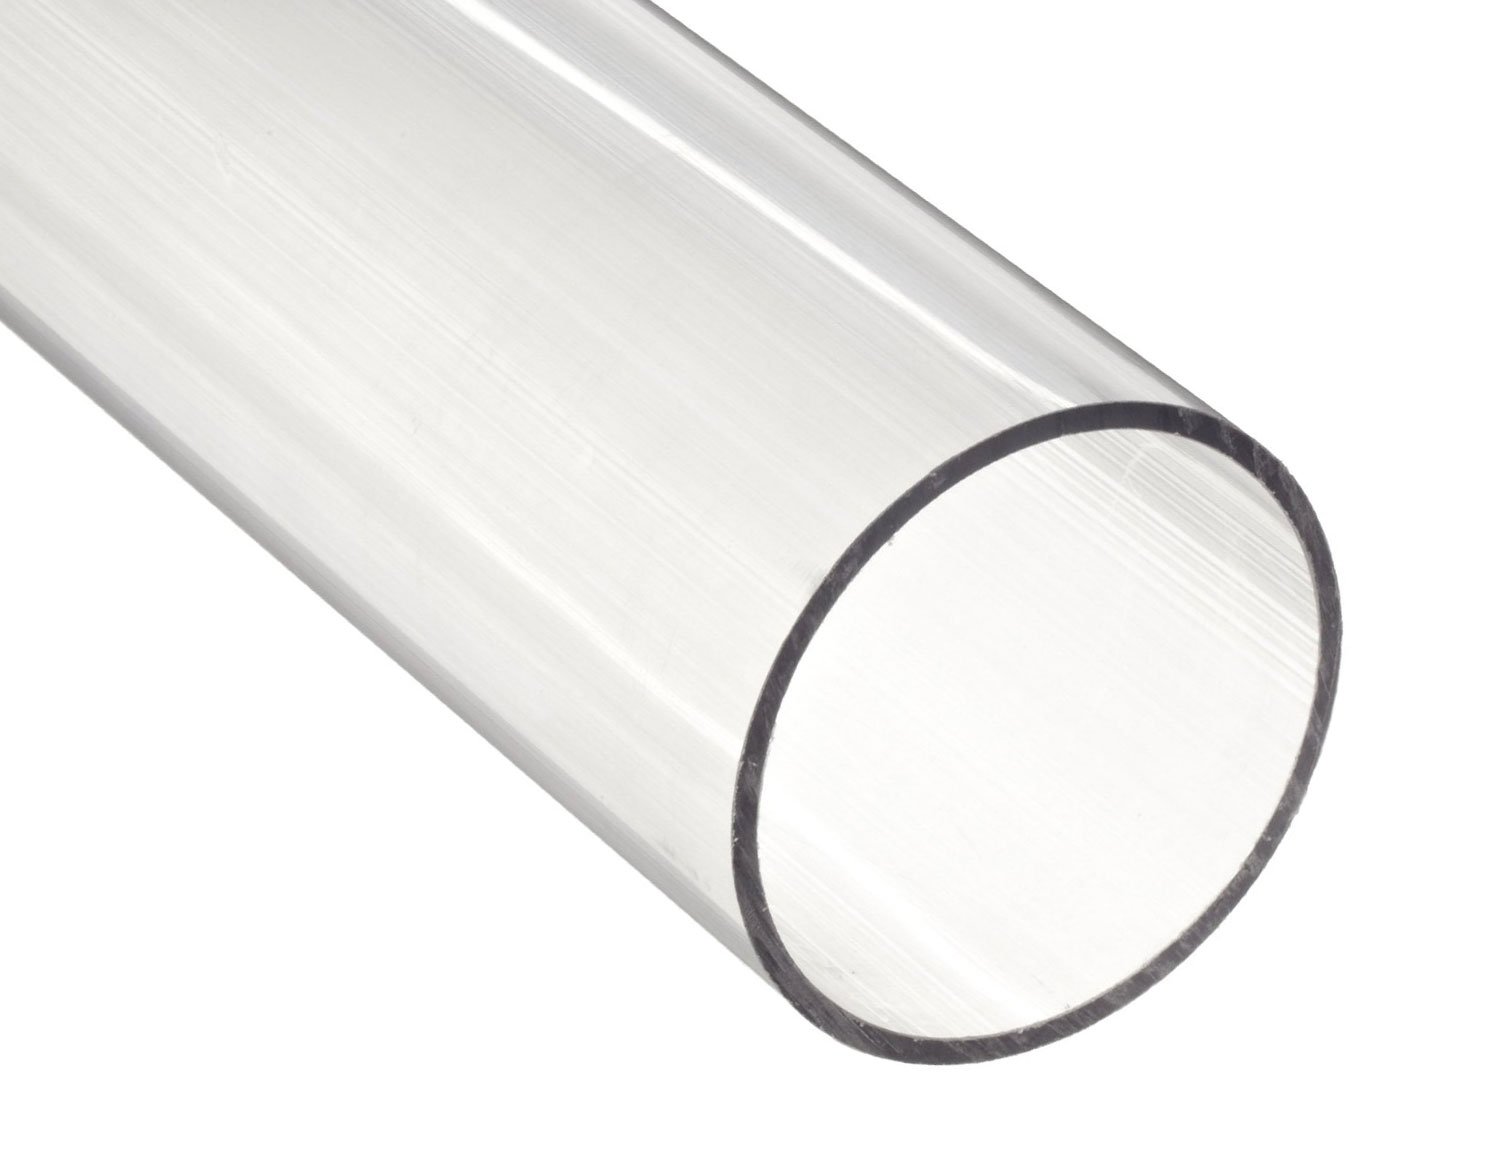 POLYCARBONATE TUBE | CLEAR